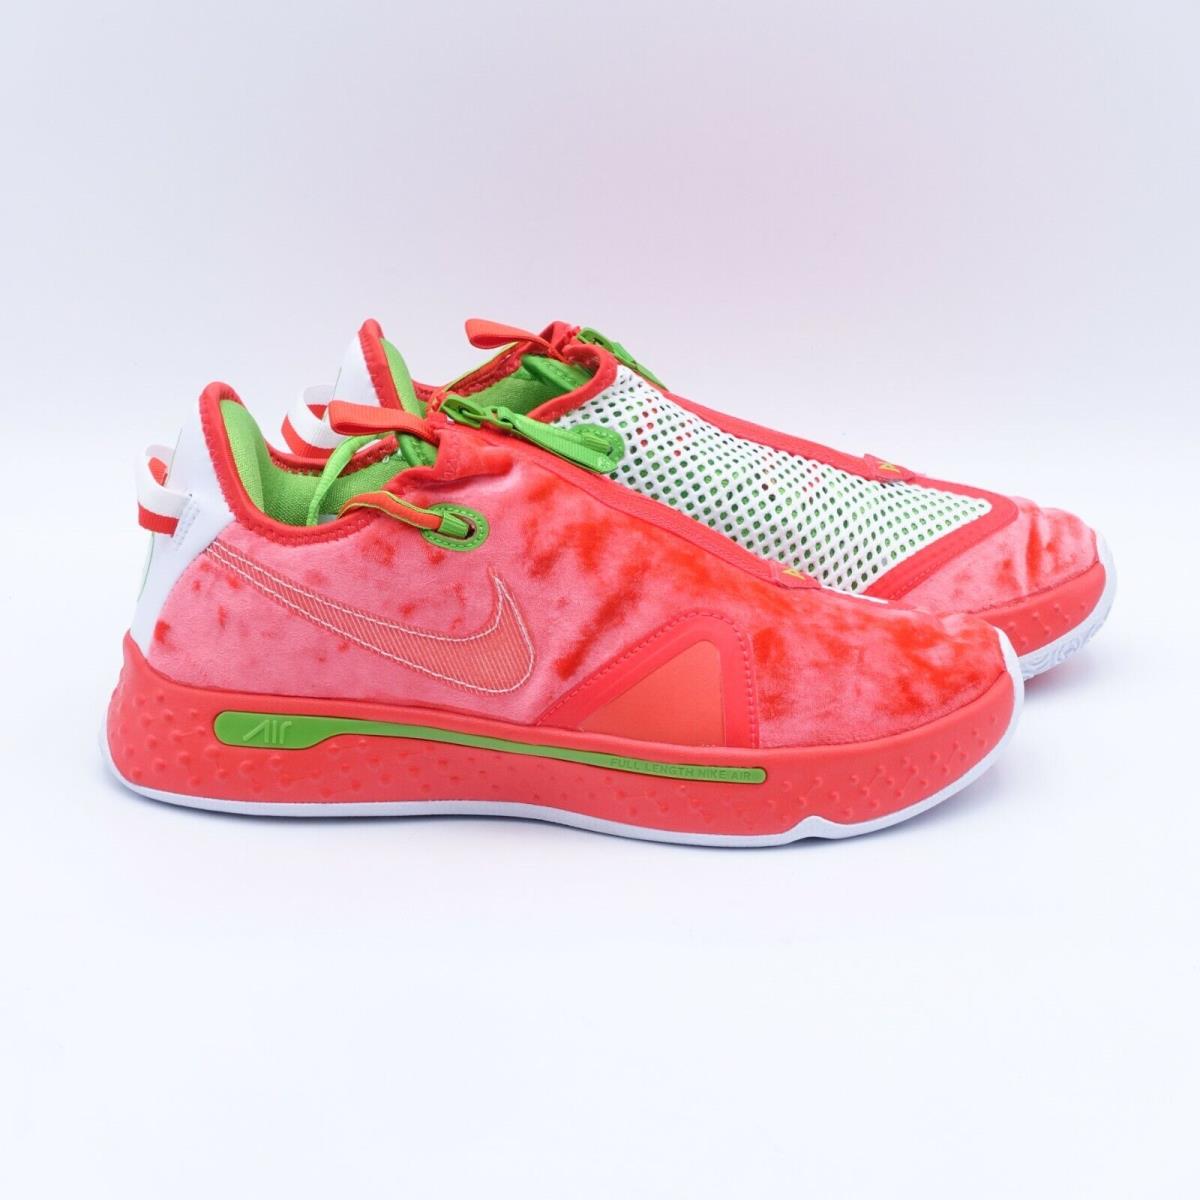 Nike shoes  - Red , Christmas/Red/White/Green Manufacturer 1